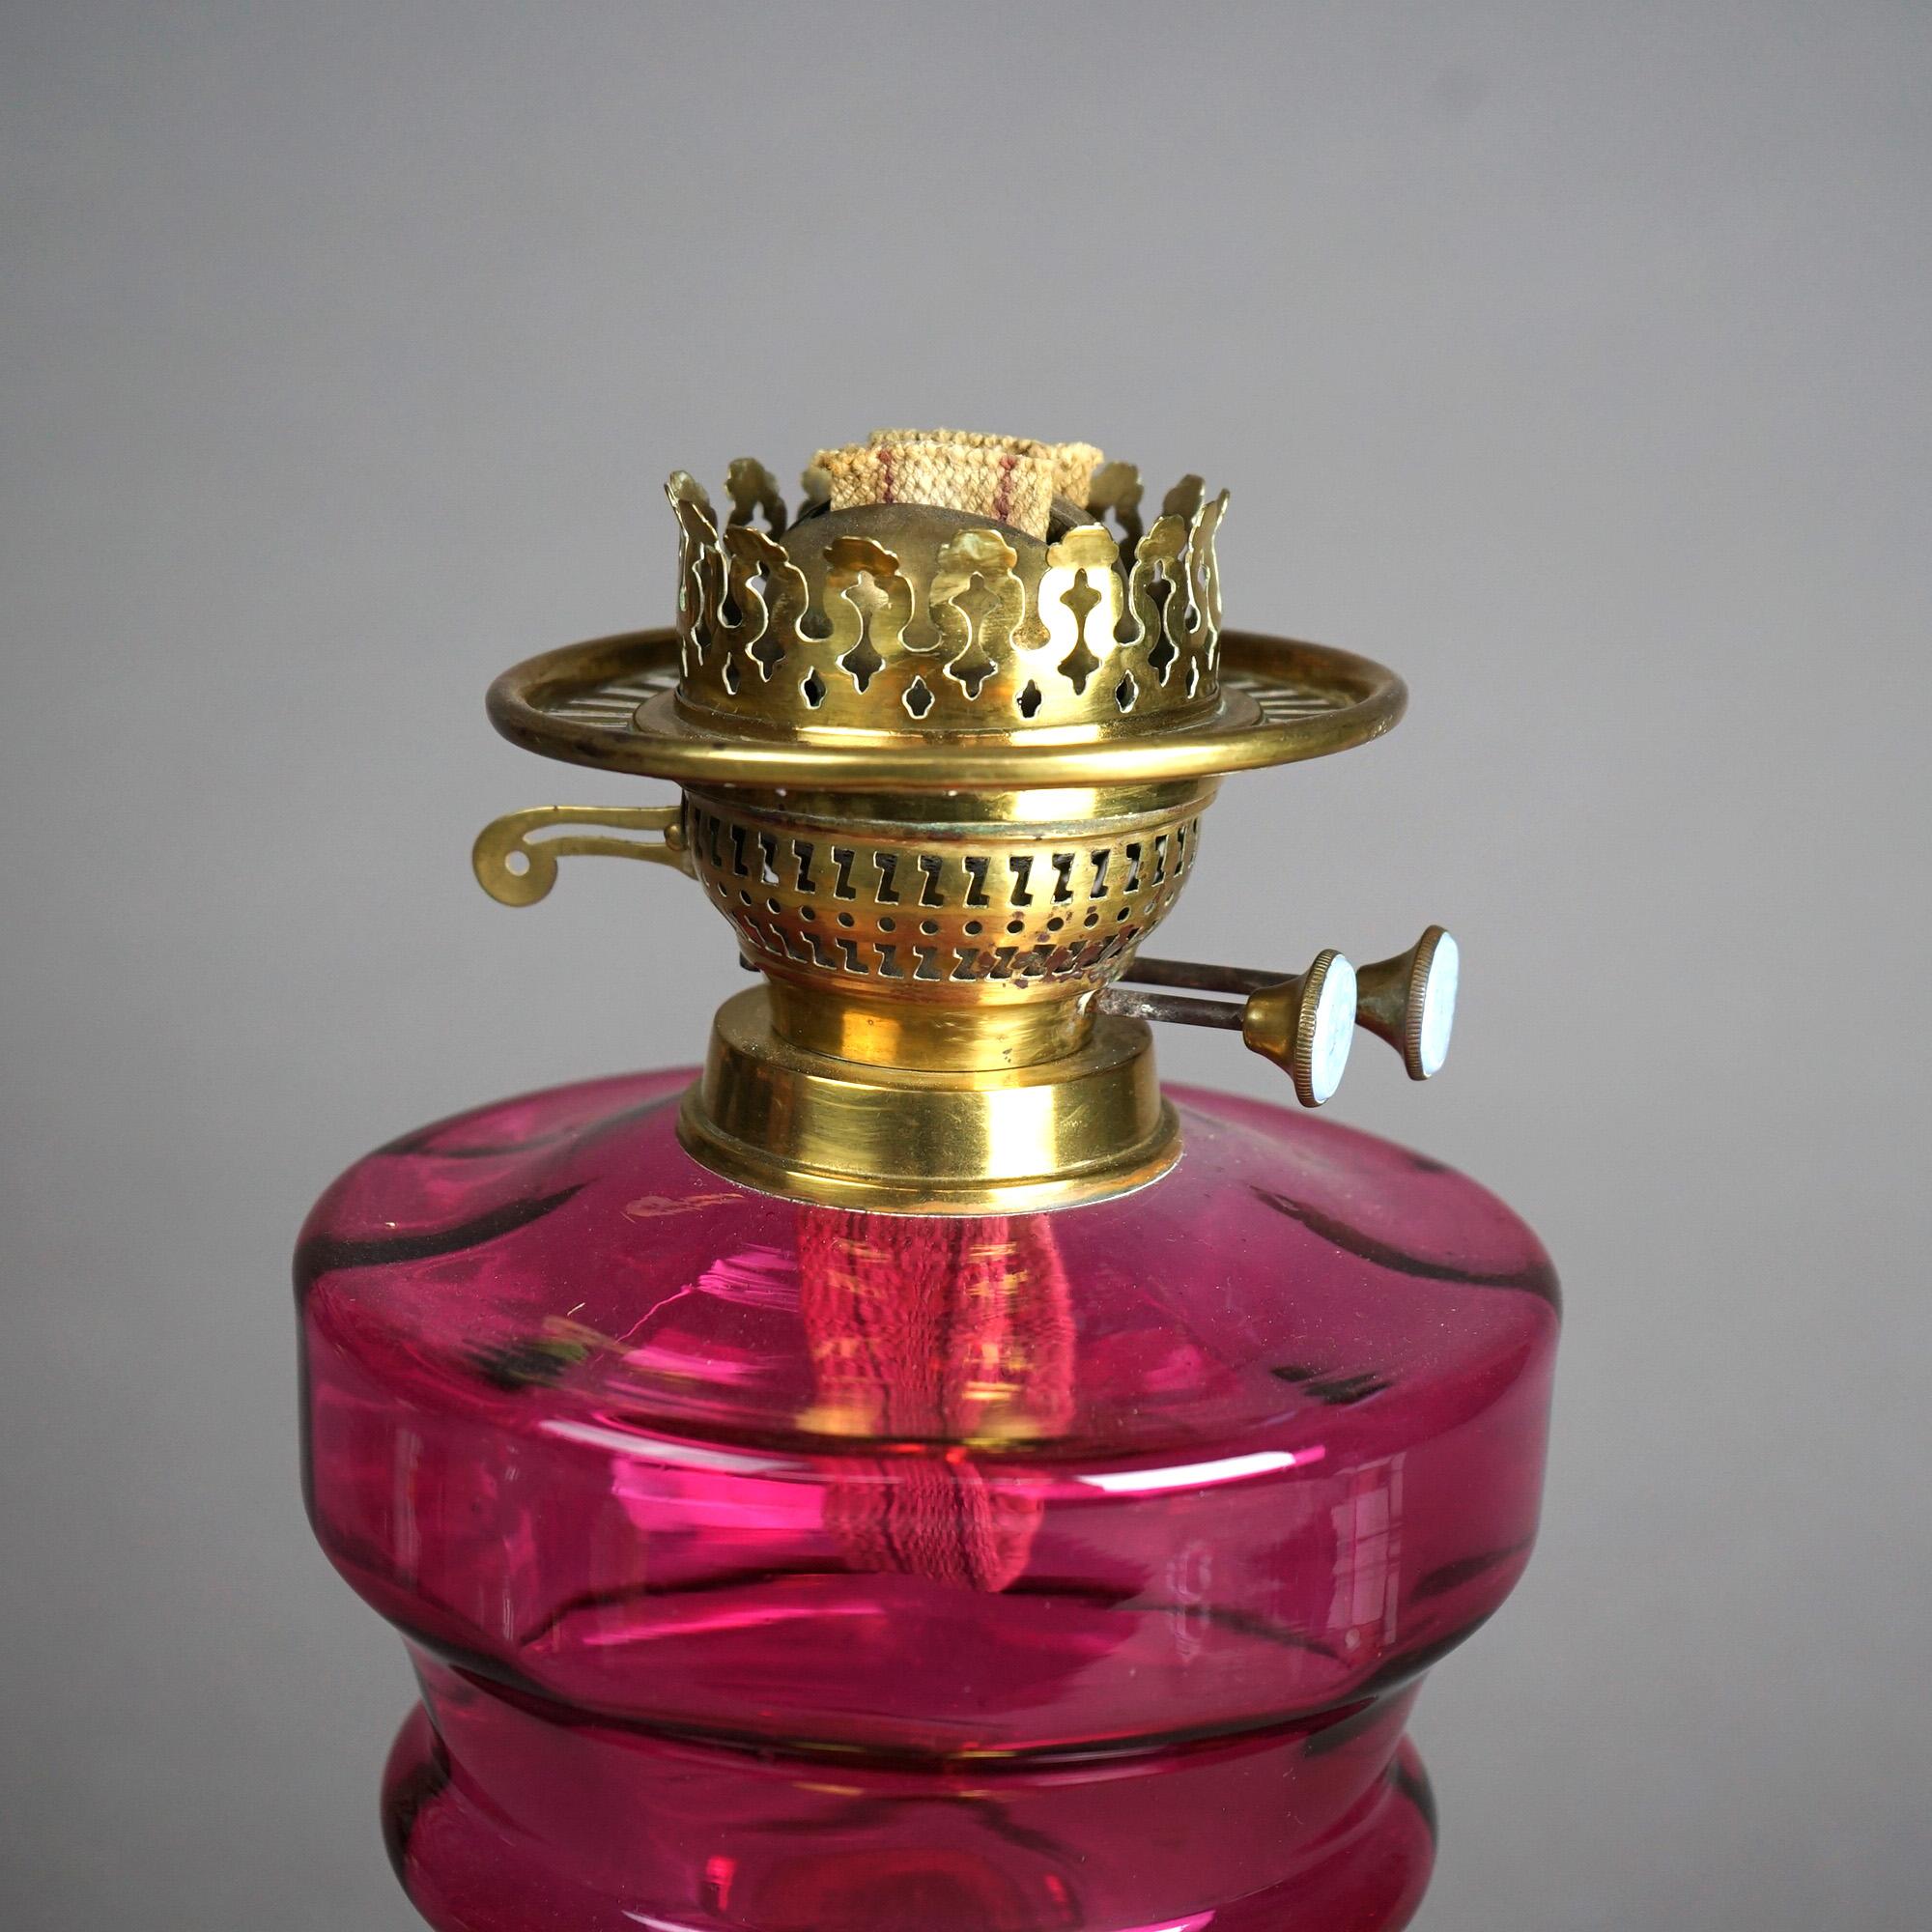 Antique Brass &Cranberry Glass “Gone With The Wind” Oil Lamp C1890 For Sale 4